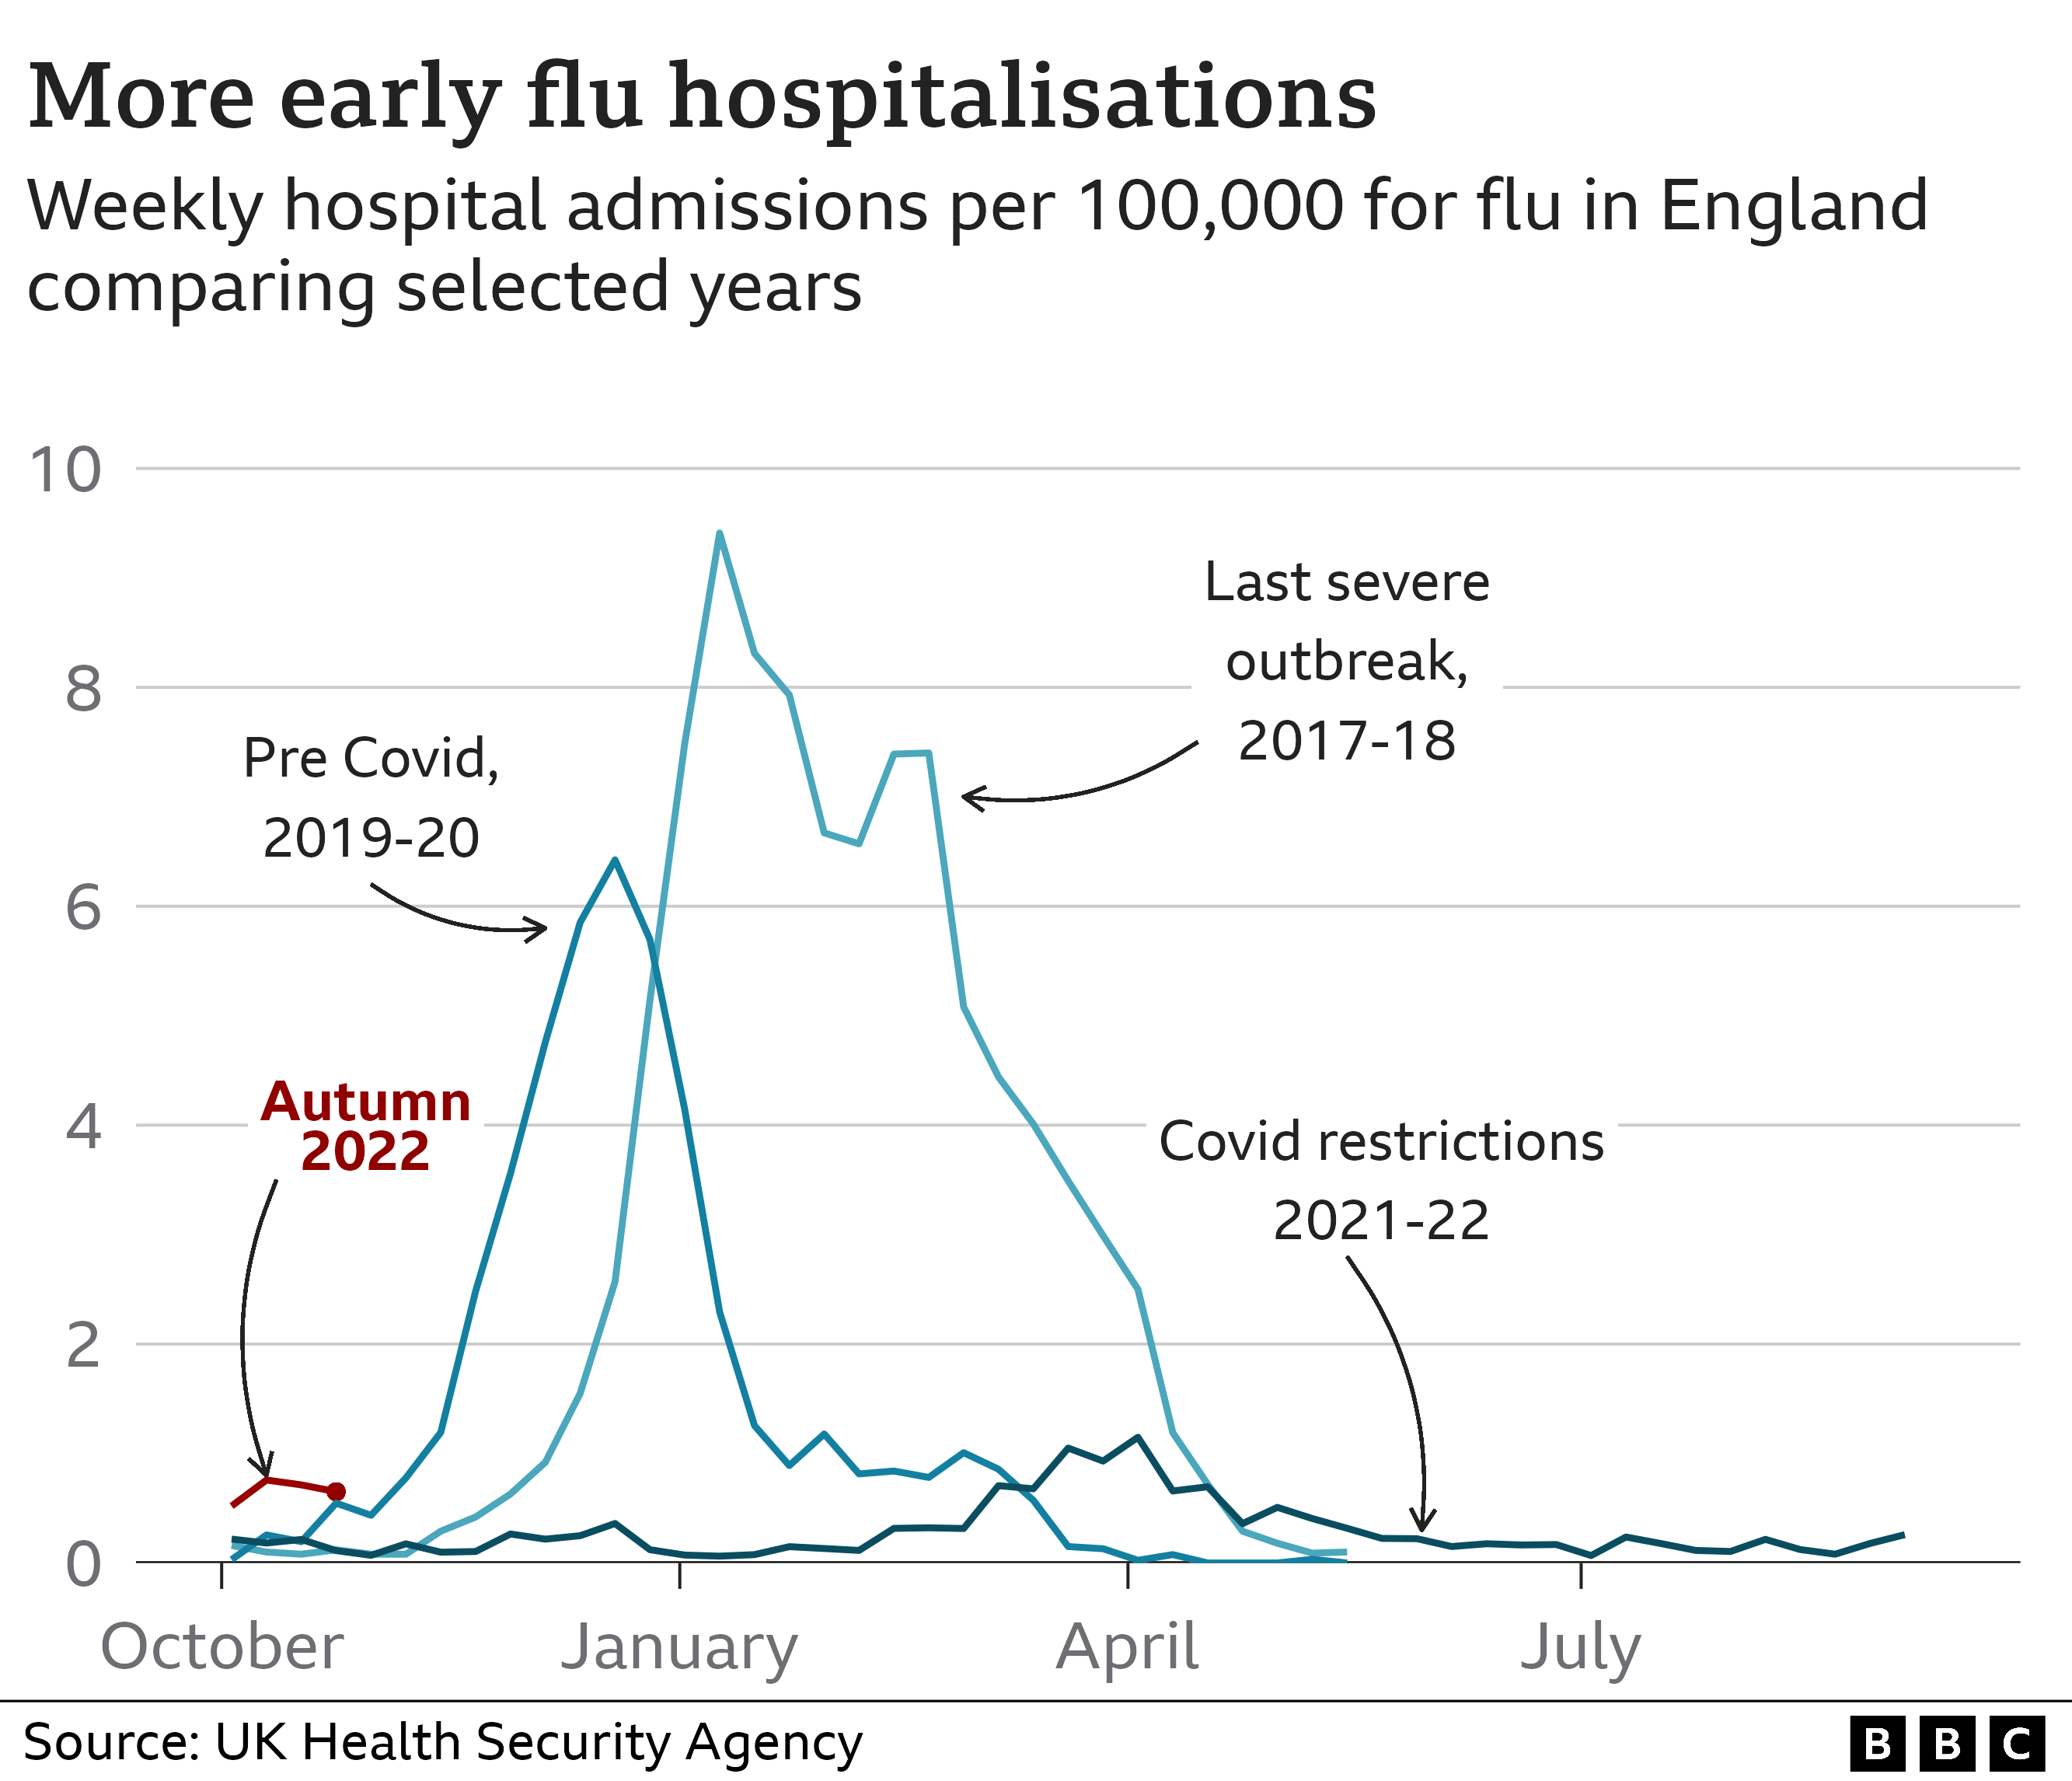 Graphic showing how the flu season has started early in 2022, while hgihlighting the bad flu season in 2017-18 while the past two winters during the covid pandemic have seen low flu seasons